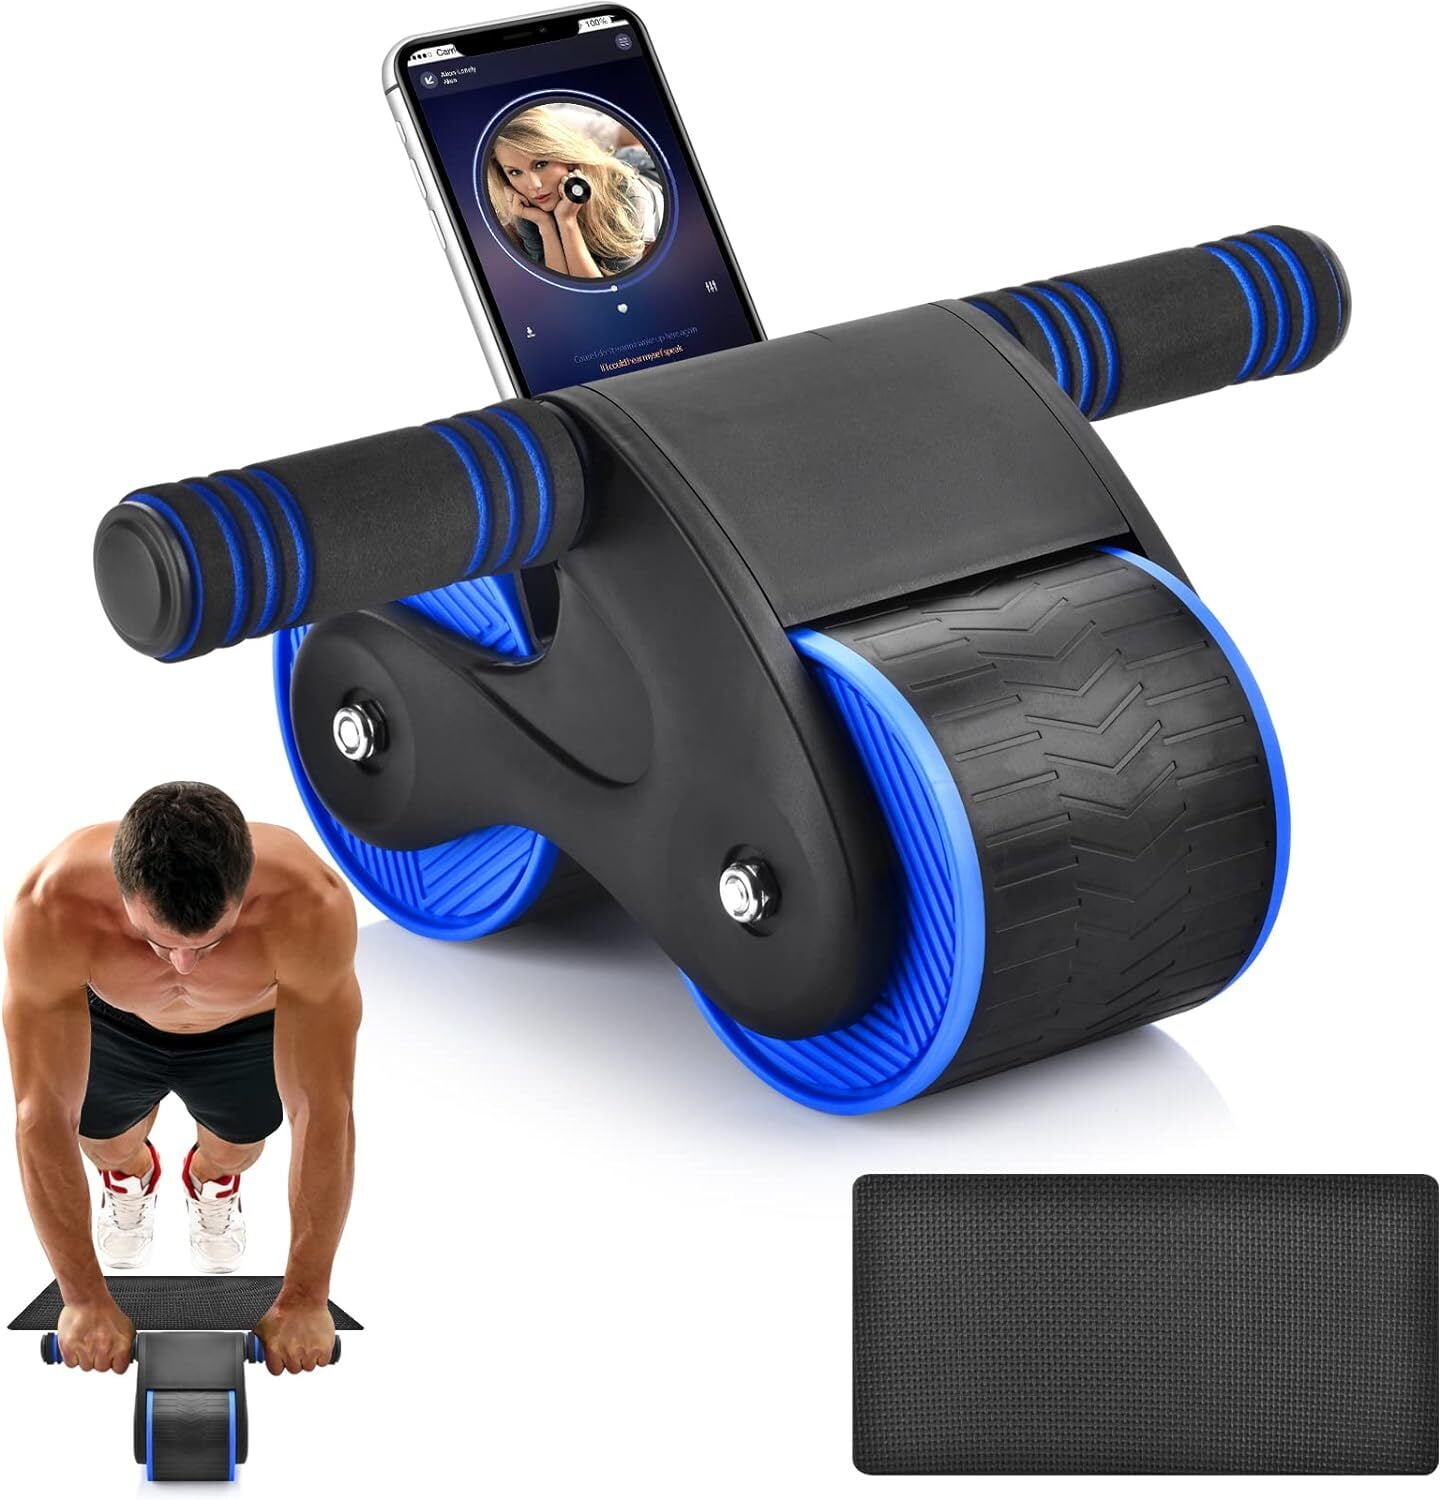 Hanru AB Roller Wheel Equipment, AB Core Workout Equipment with Automatic  Rebound Assistance and Resistance Springs, AB Core Exercise Equipment with  Knee Pad Accessories for Home Gym Fitness Equipment 